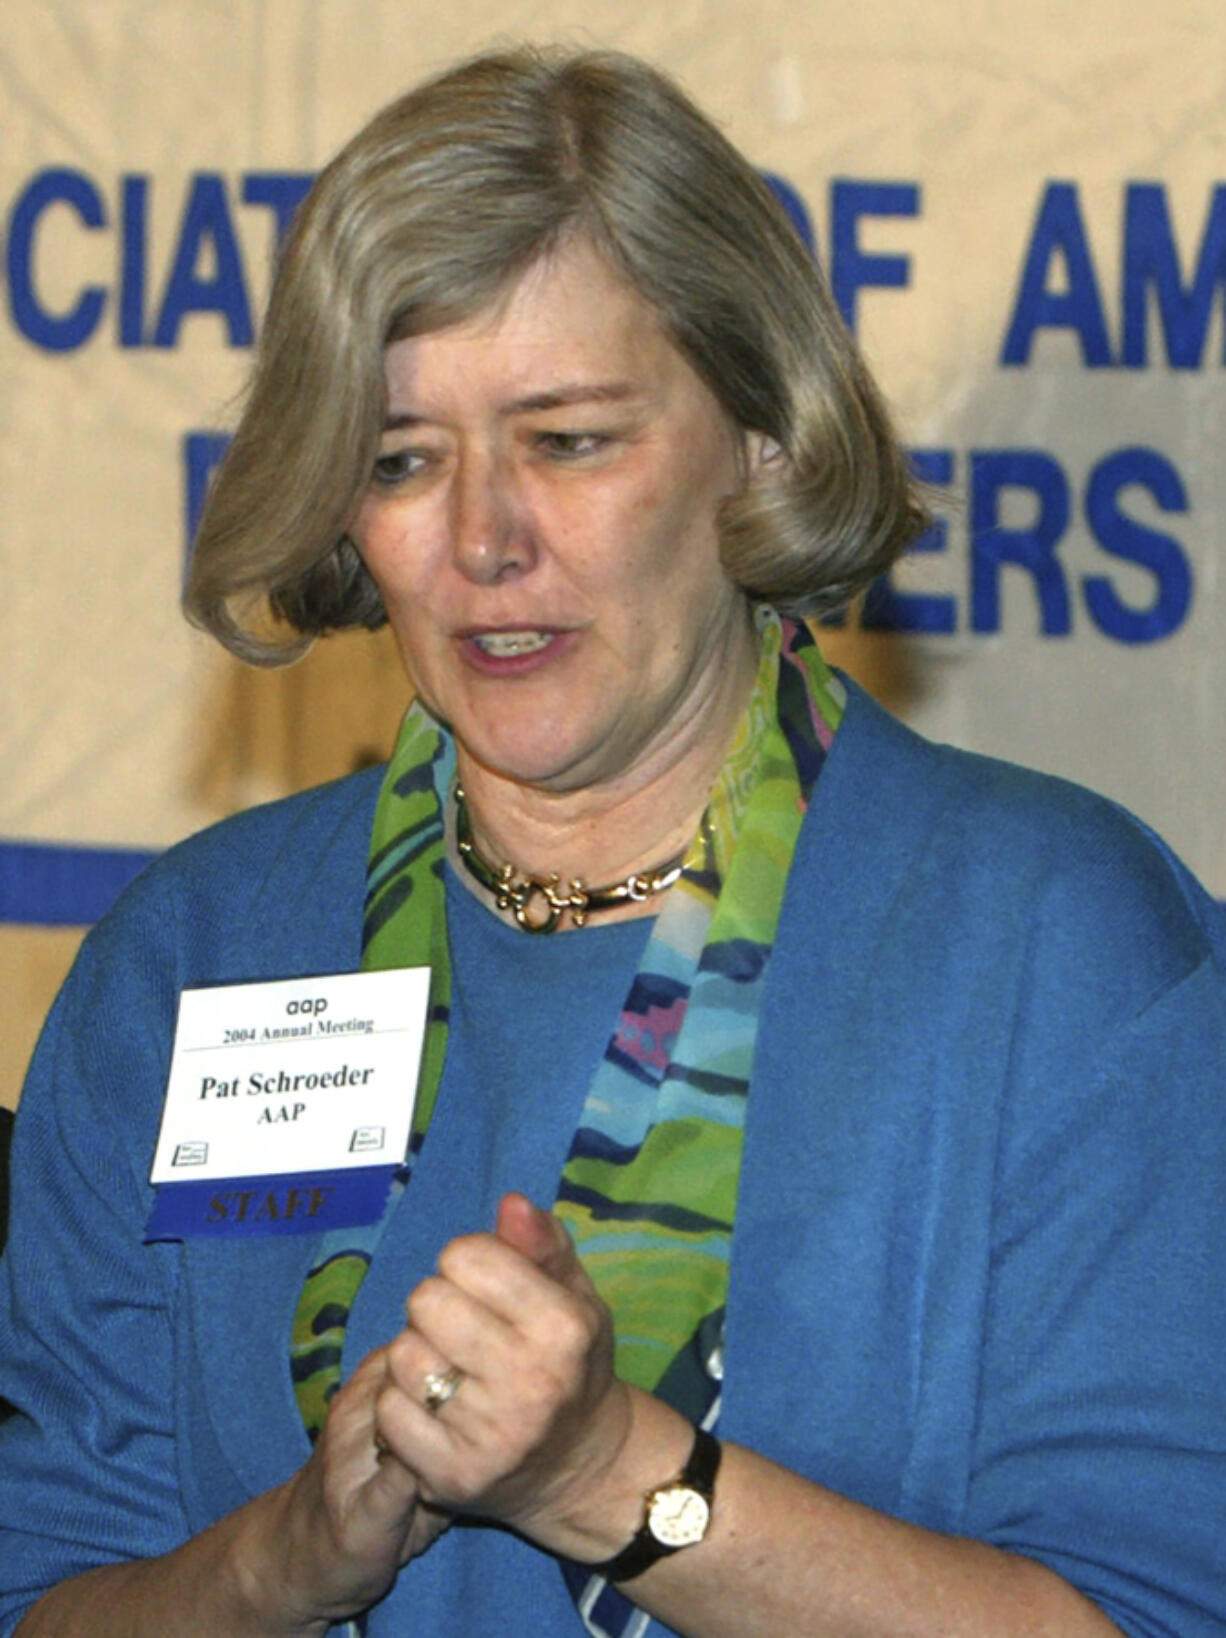 FILE - Association of American Publishers President Pat Schroeder attends the AAP's 2004 general annual meeting in Washington on Feb. 26, 2004. Schroeder, a former Colorado representative and pioneer for women's and family rights in Congress, died Monday night, March 13, 2023, at the age of 82. Schroeder's former press secretary, Andrea Camp, said Schroeder suffered a stroke recently and died at a hospital in Florida, the state where she had been residing.